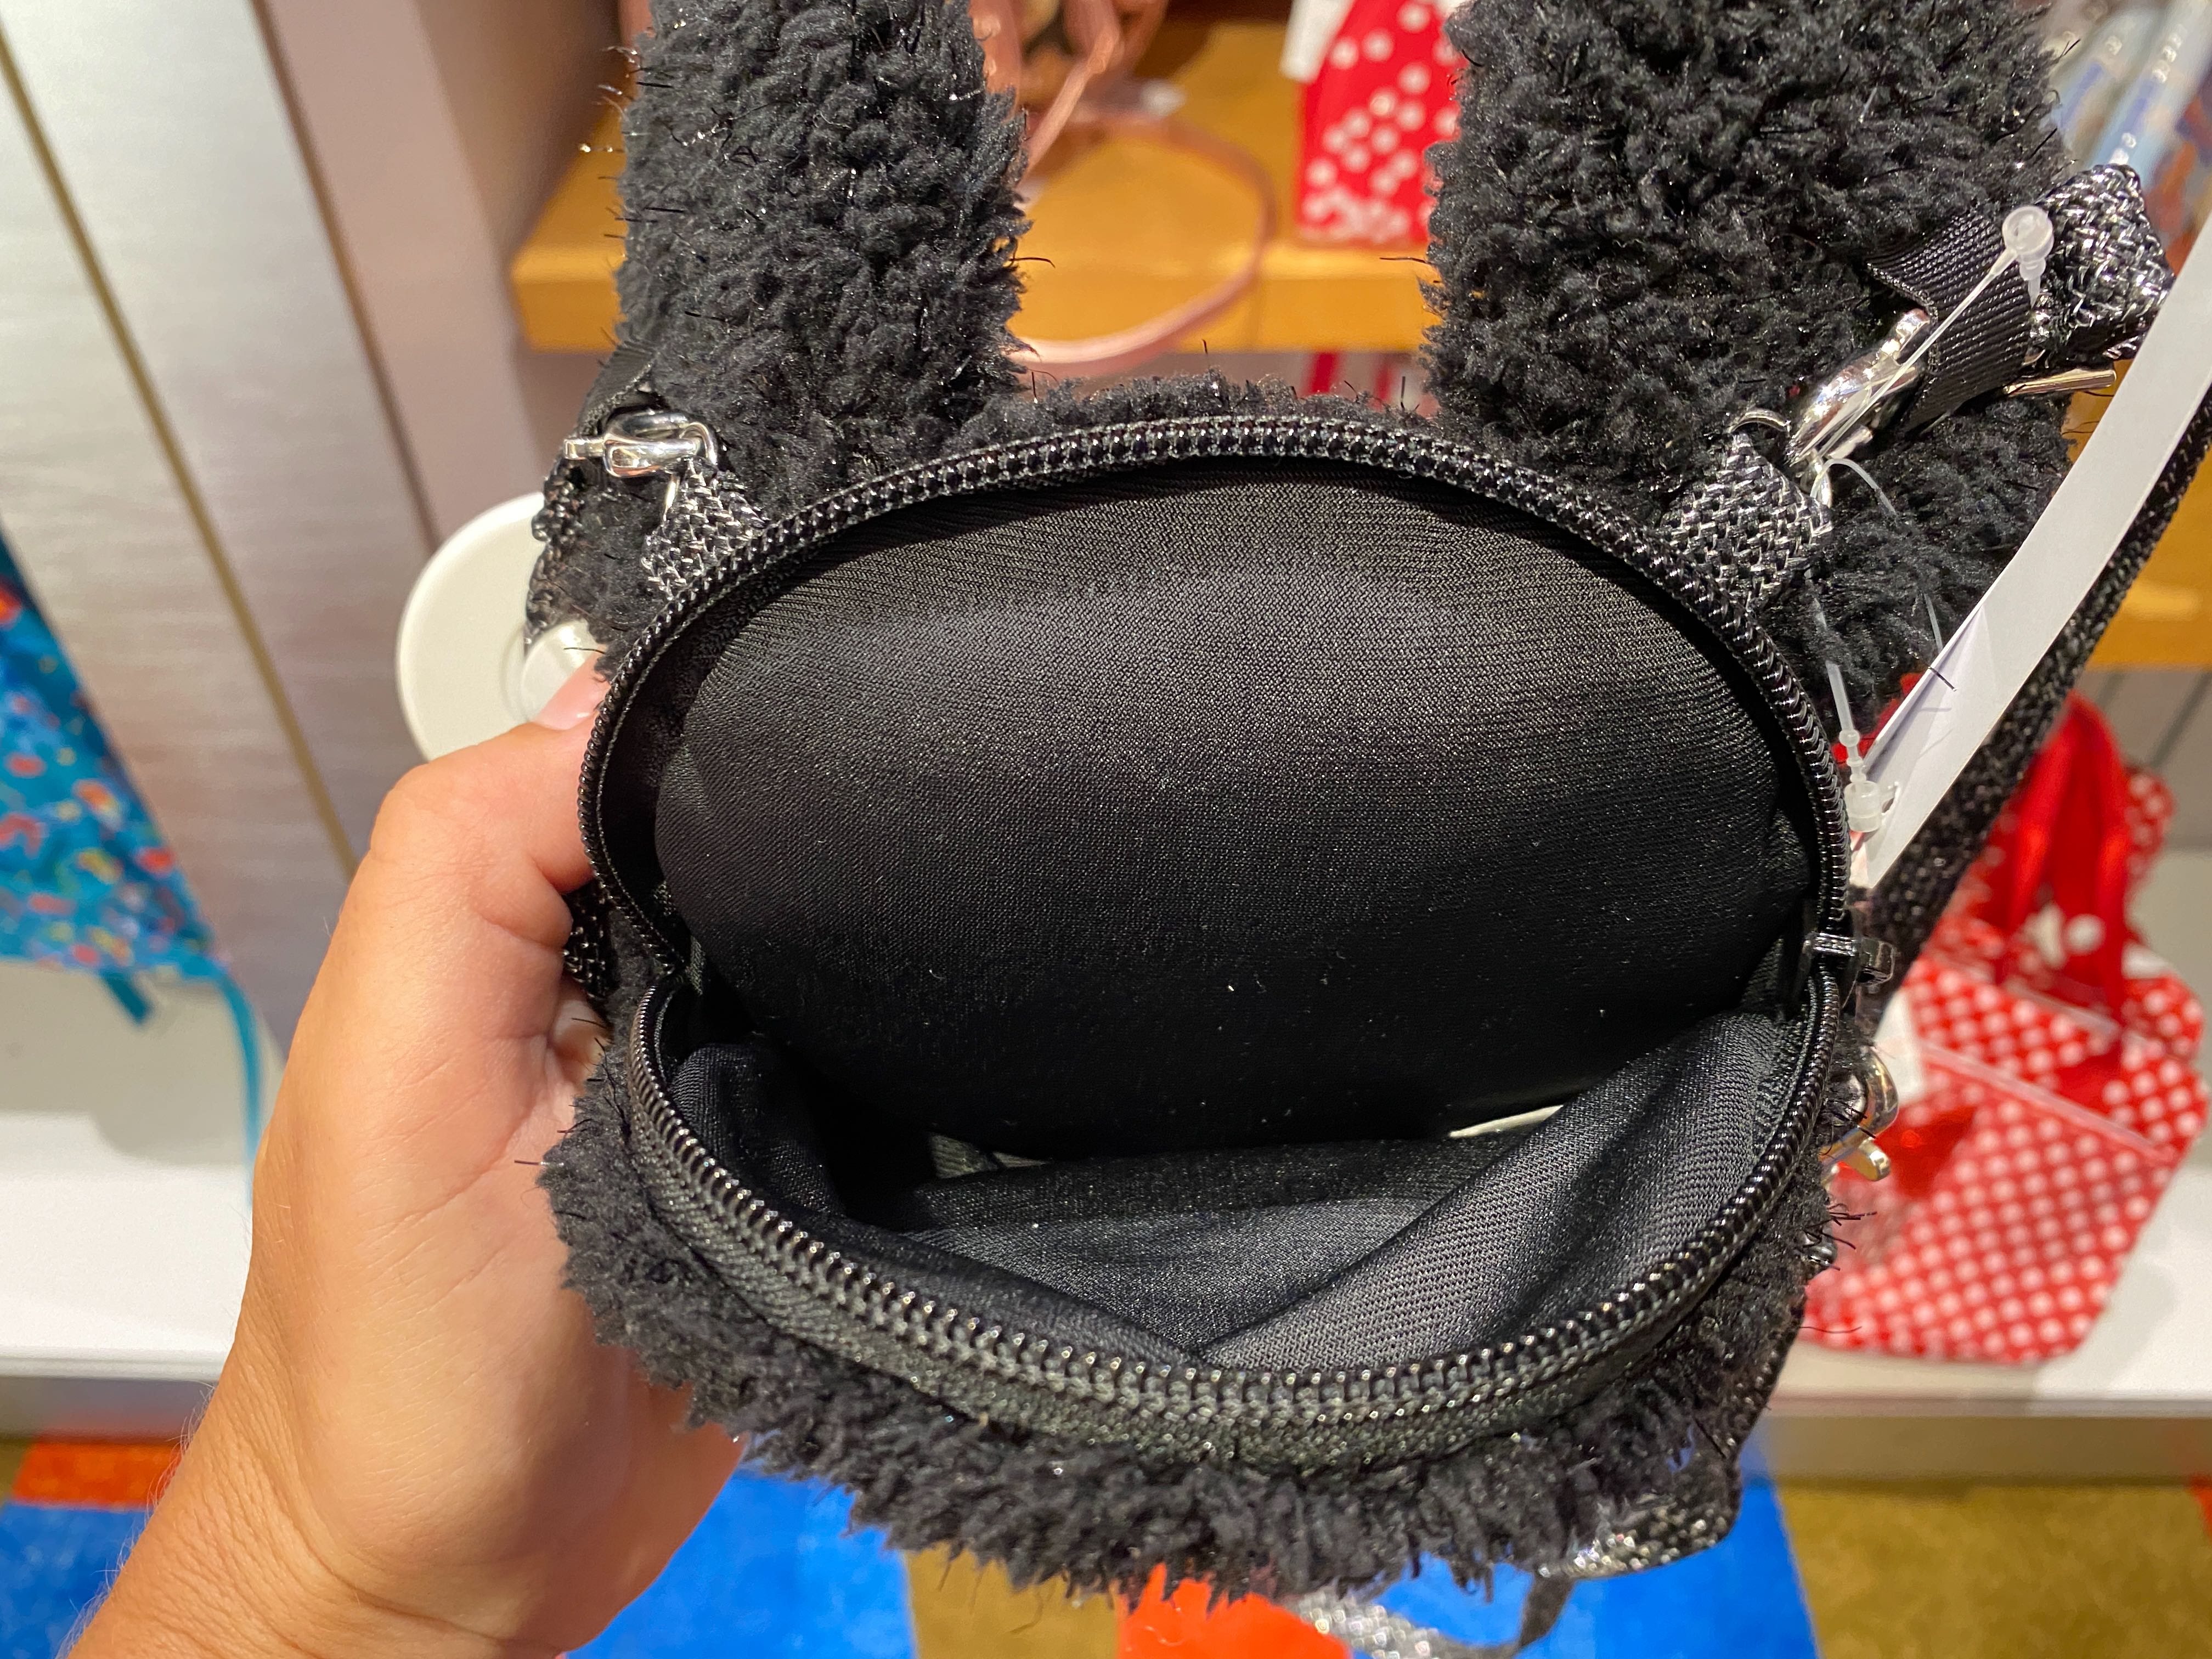 louis vuitton mickey mouse bags